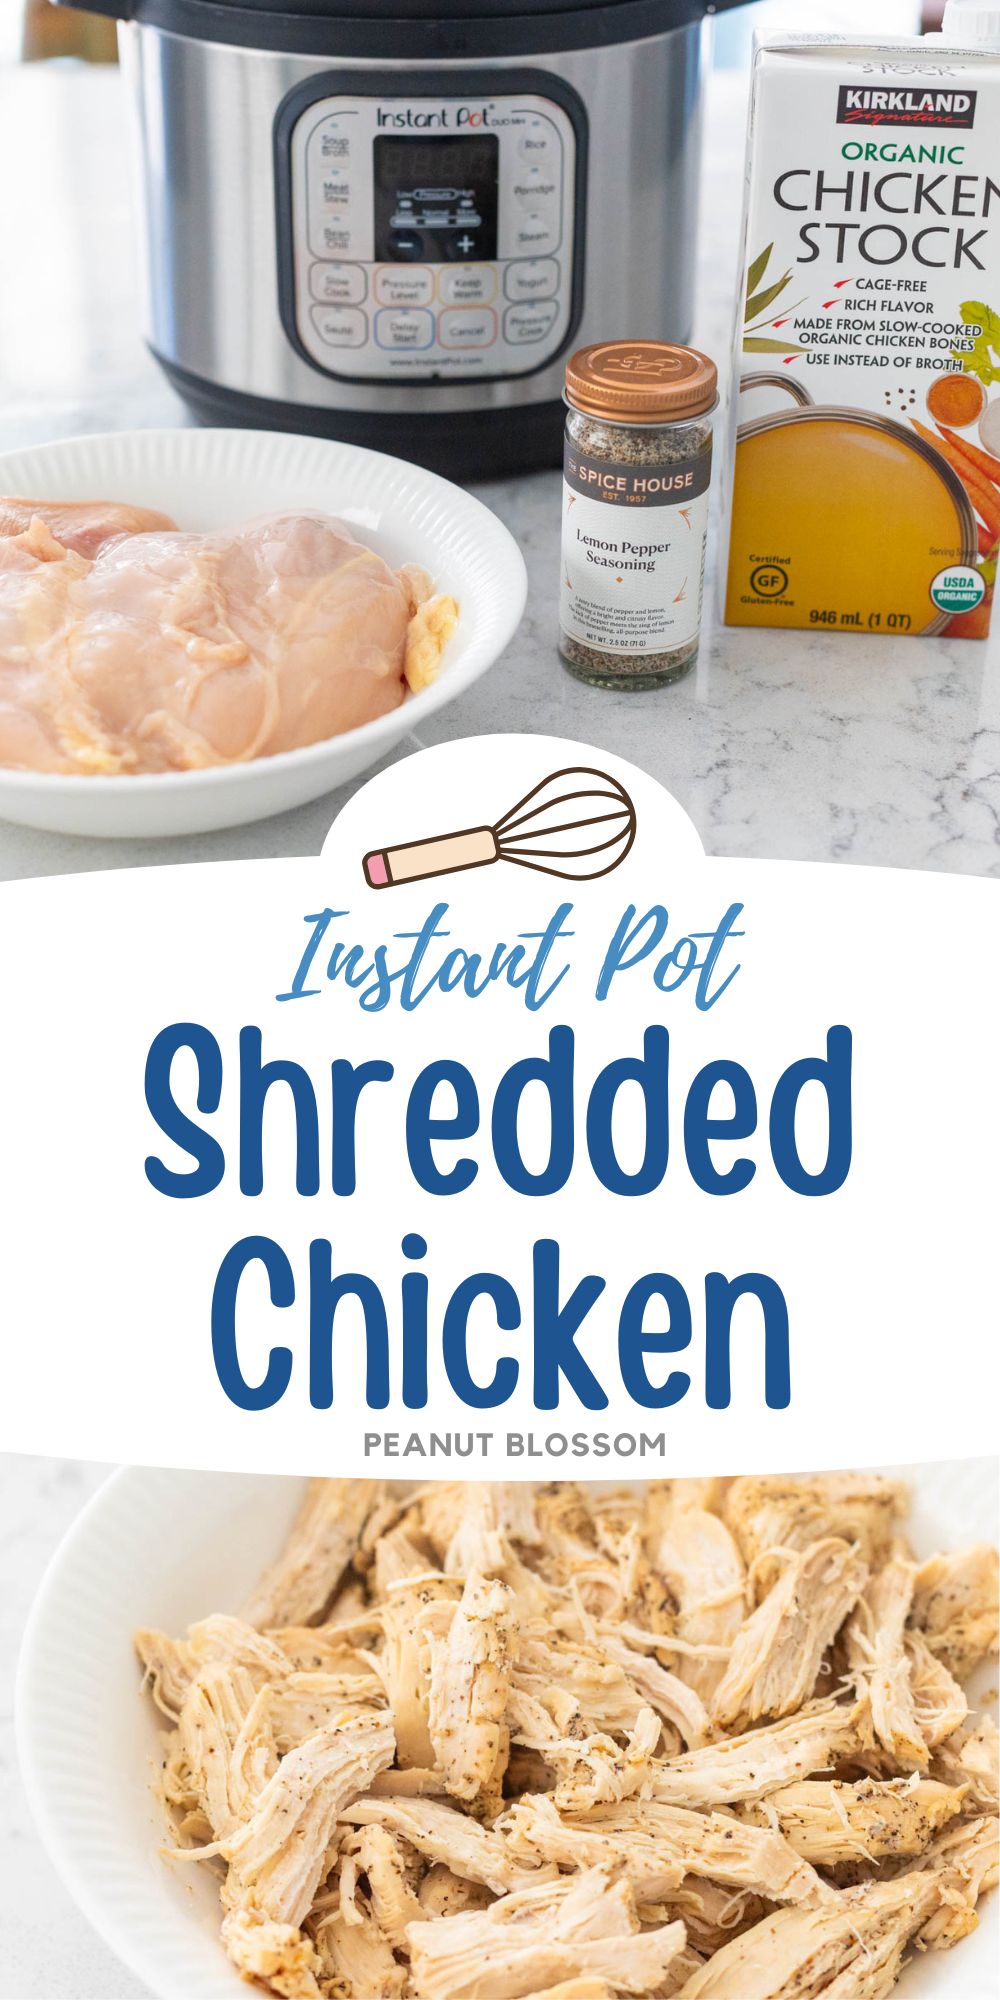 The photo collage shows a bowl of shredded chicken next to a photo of the Instant Pot and ingredients.